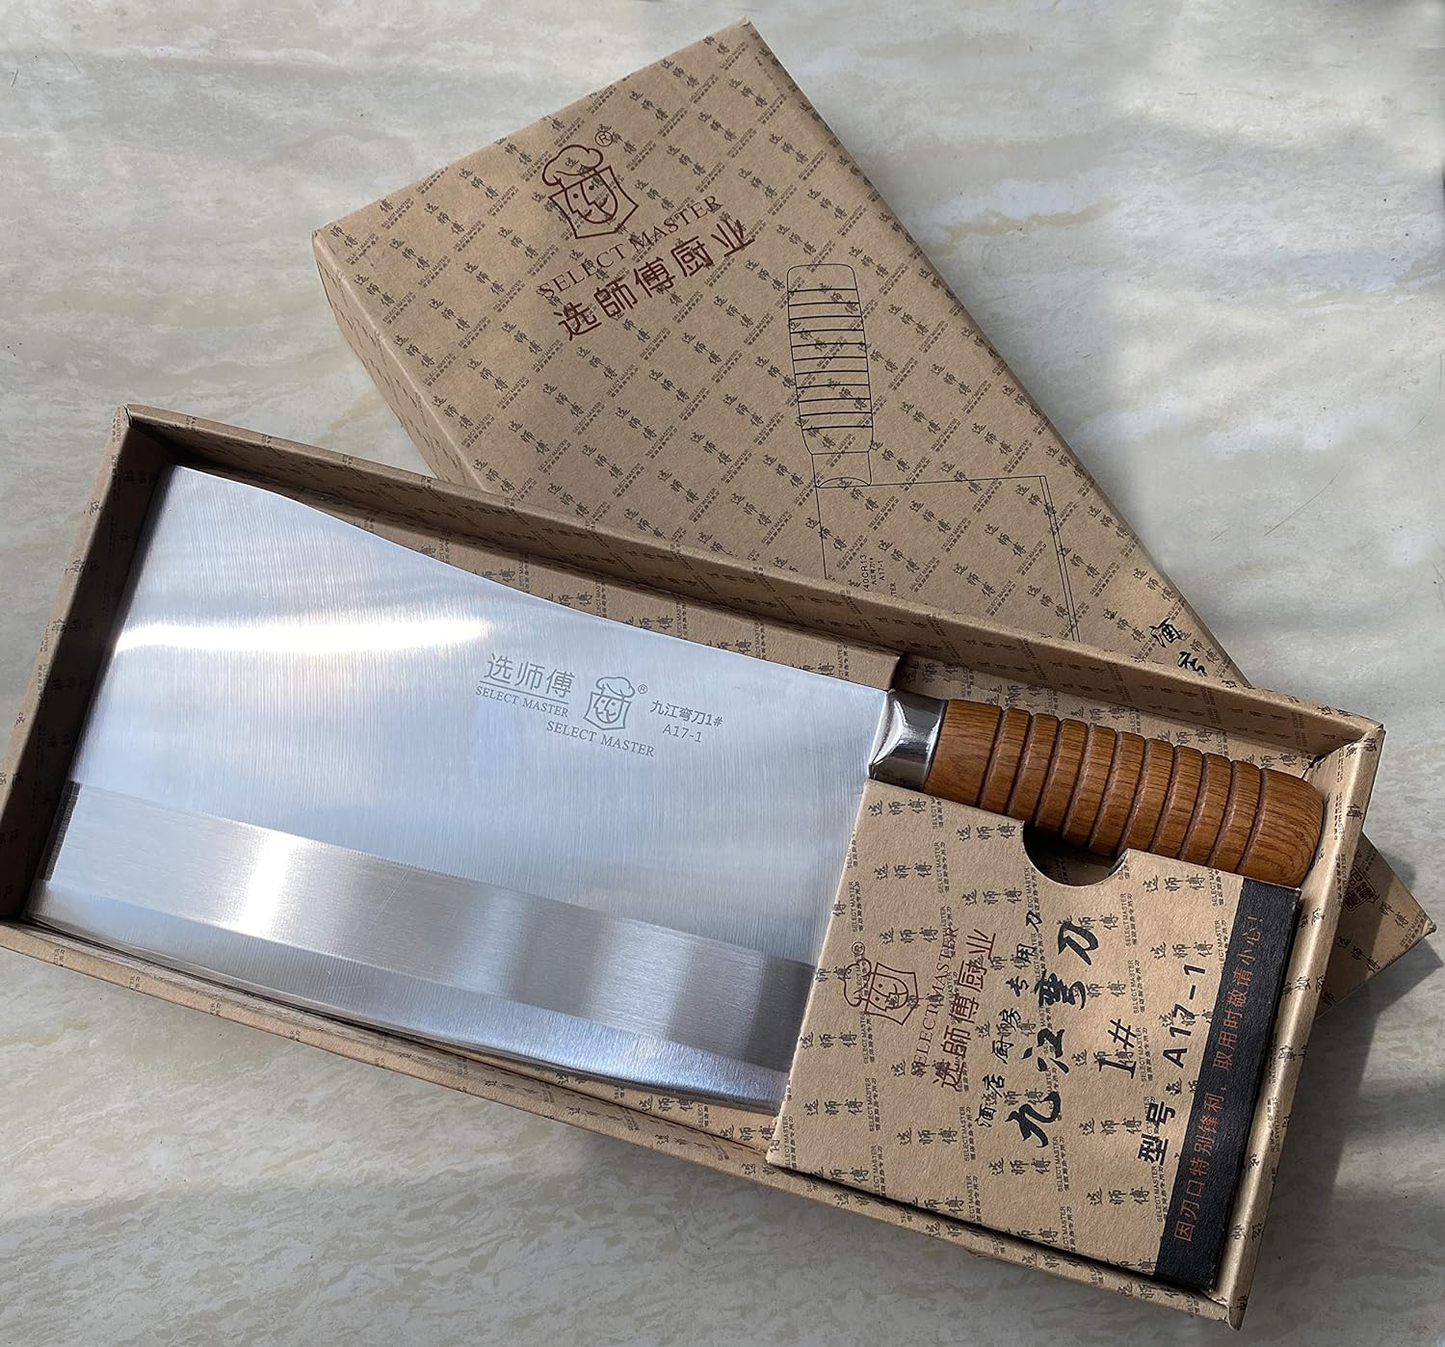 KD Meat Cleaver Professional Chinese Chef Knife Heavy Duty Bone Chopper Kitchen Knife Super Thick Blade